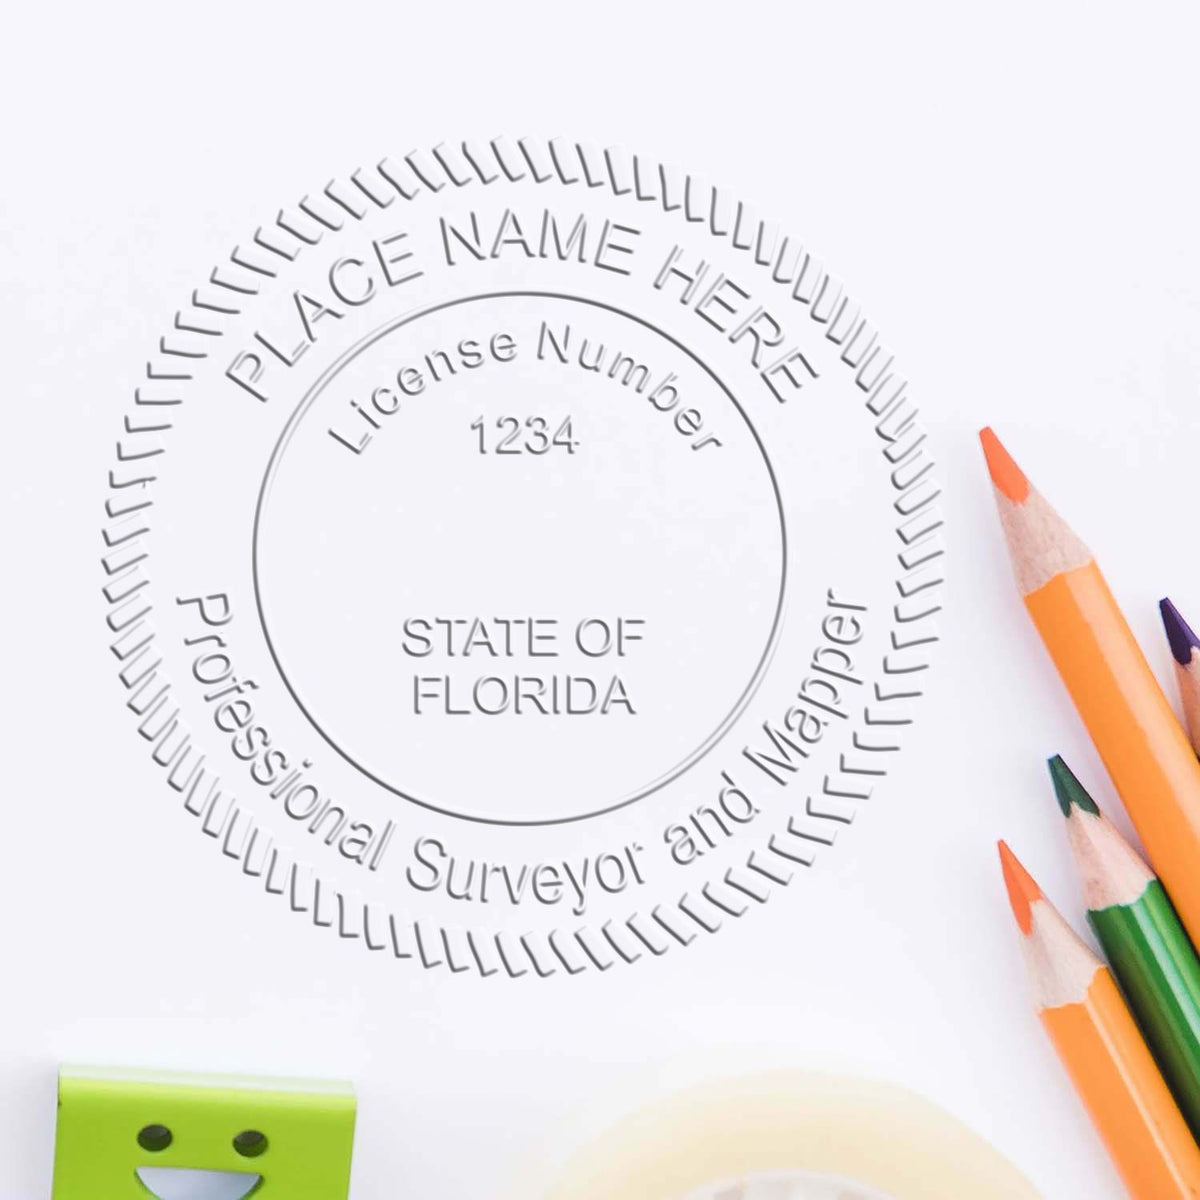 A stamped imprint of the Gift Florida Land Surveyor Seal in this stylish lifestyle photo, setting the tone for a unique and personalized product.